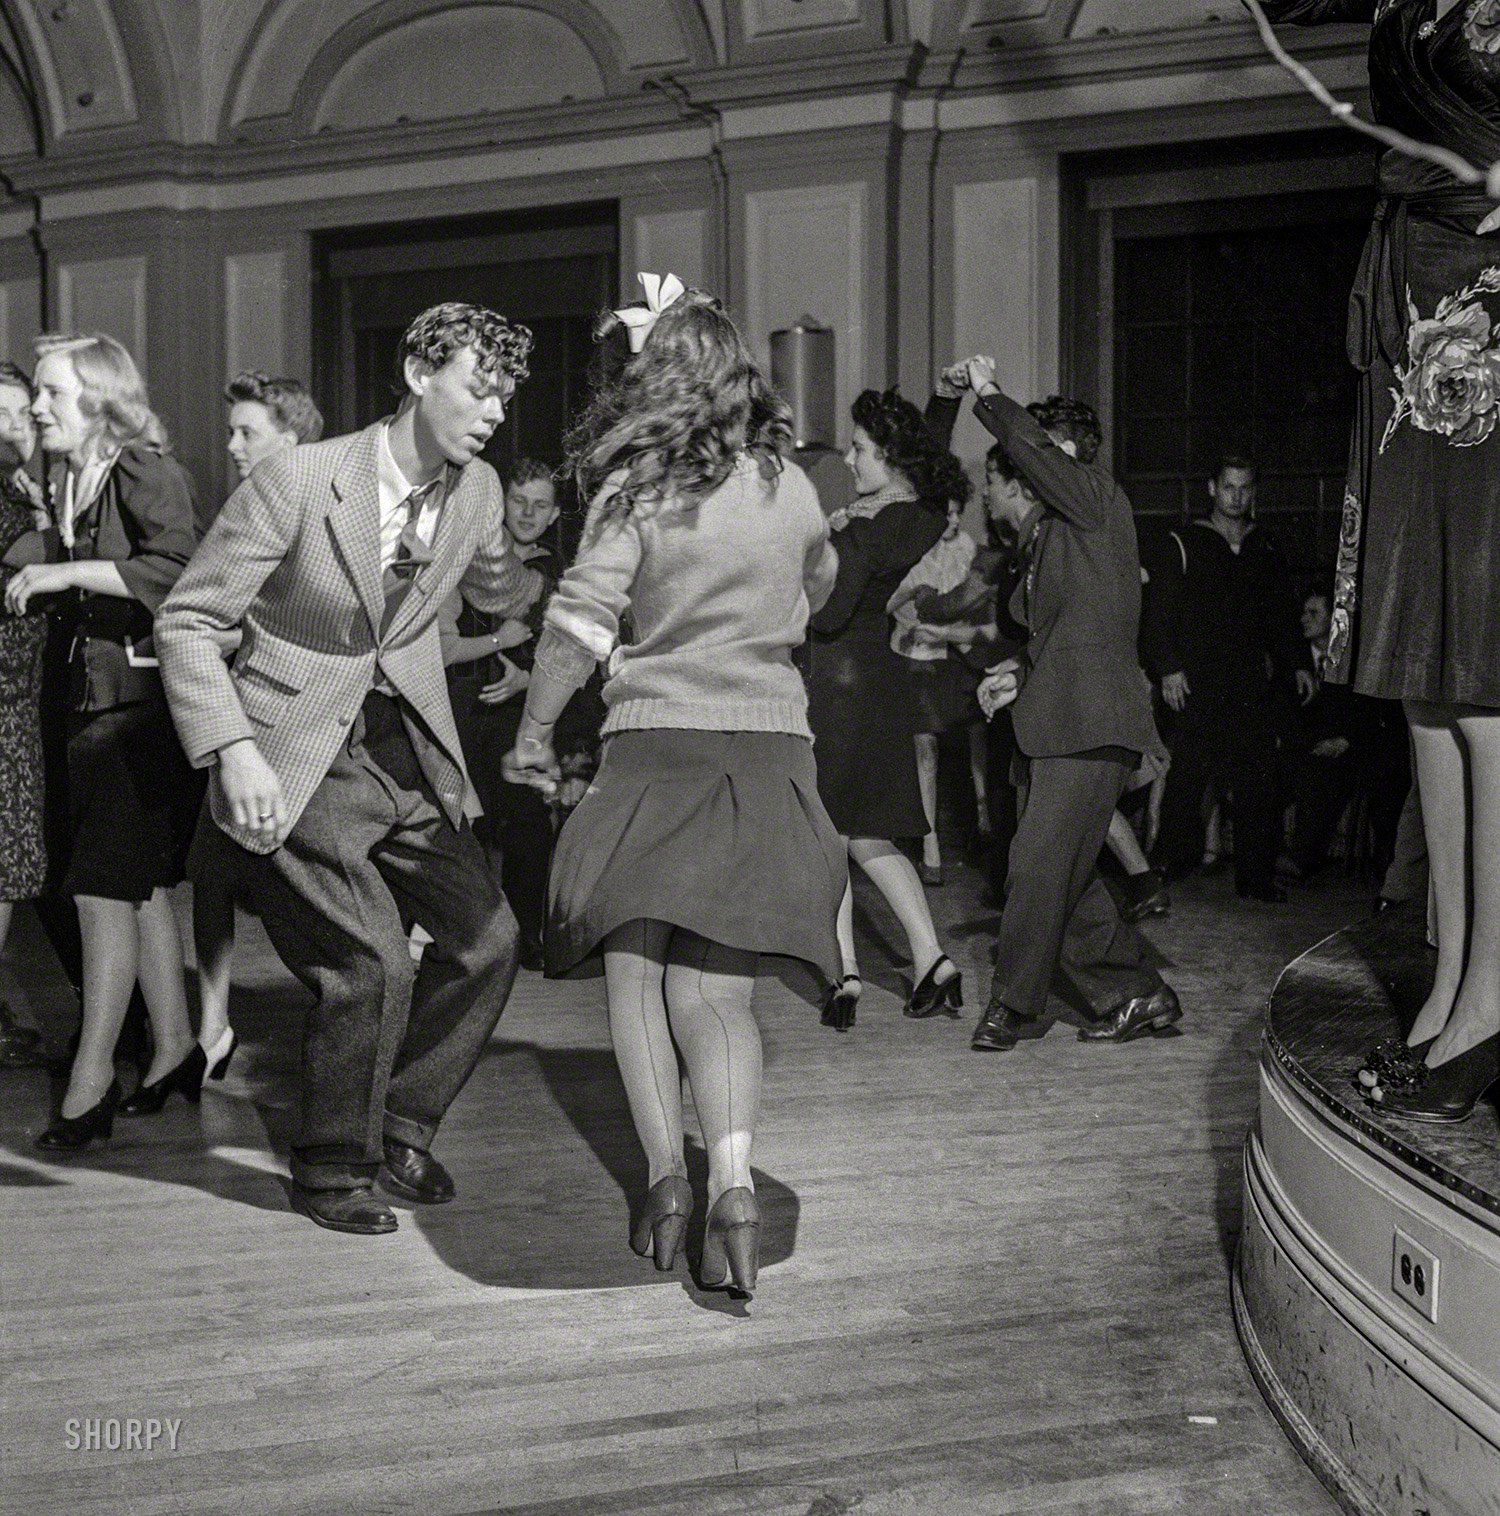 April 1943. Washington, D.C. "Jitterbugs at an Elks Club dance, the 'cleanest dance in town'." Photo by Esther Bubley, Office of War Information. View full size.